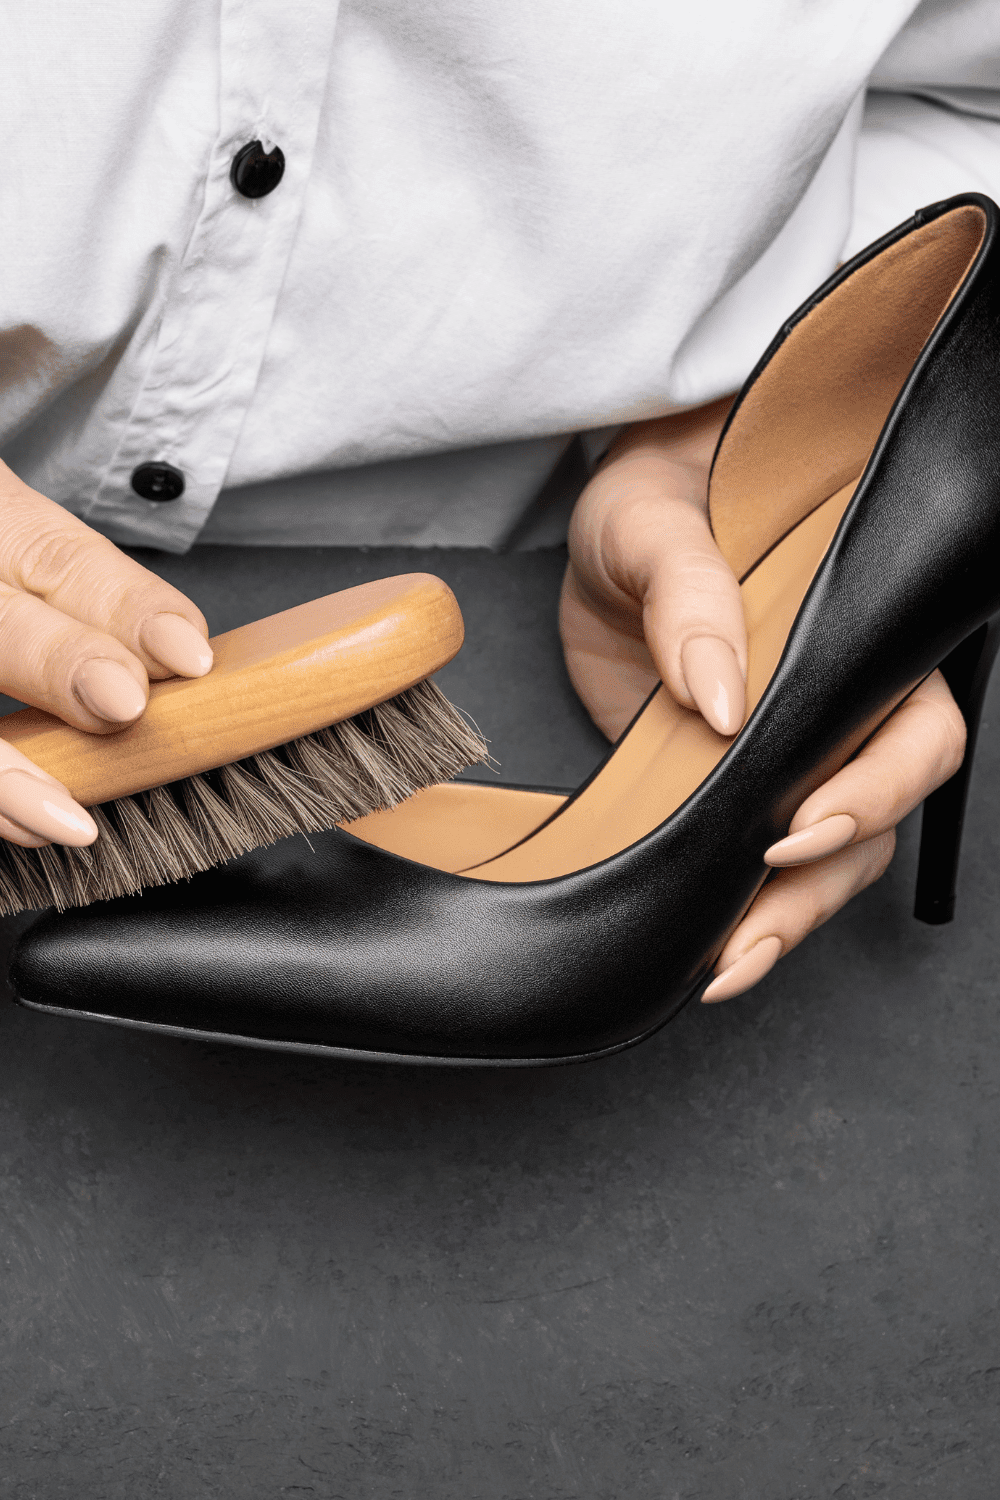 how to clean high heels